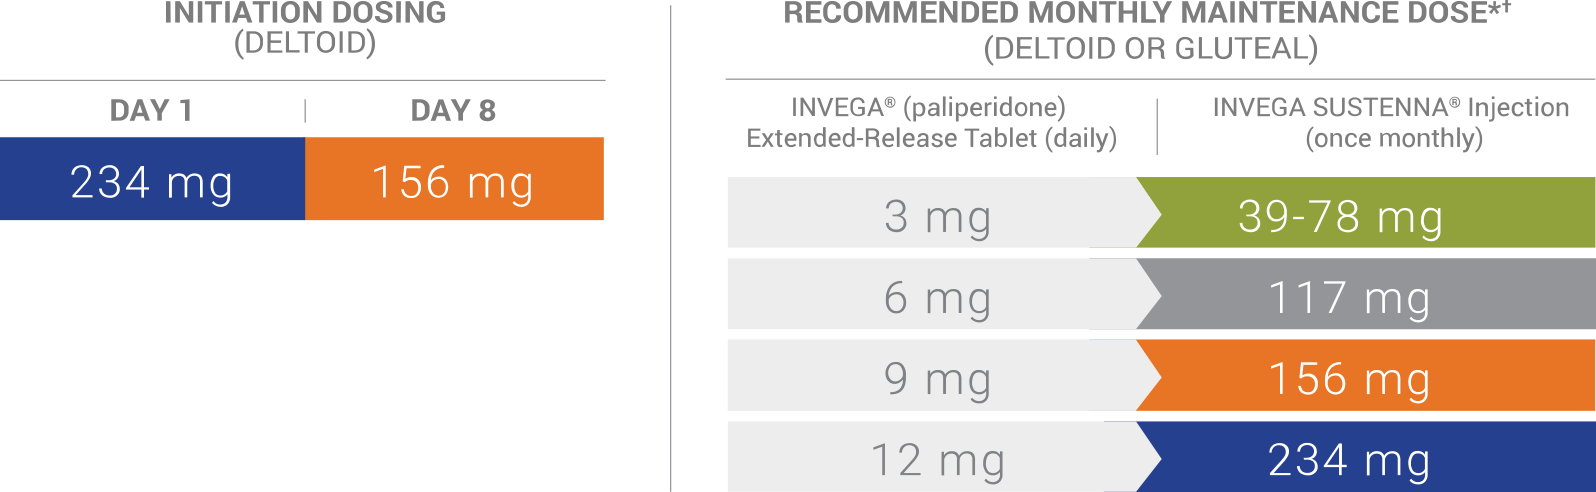 A chart showing the recommended dosage when transitioning from INVEGA SUSTENNA® ®